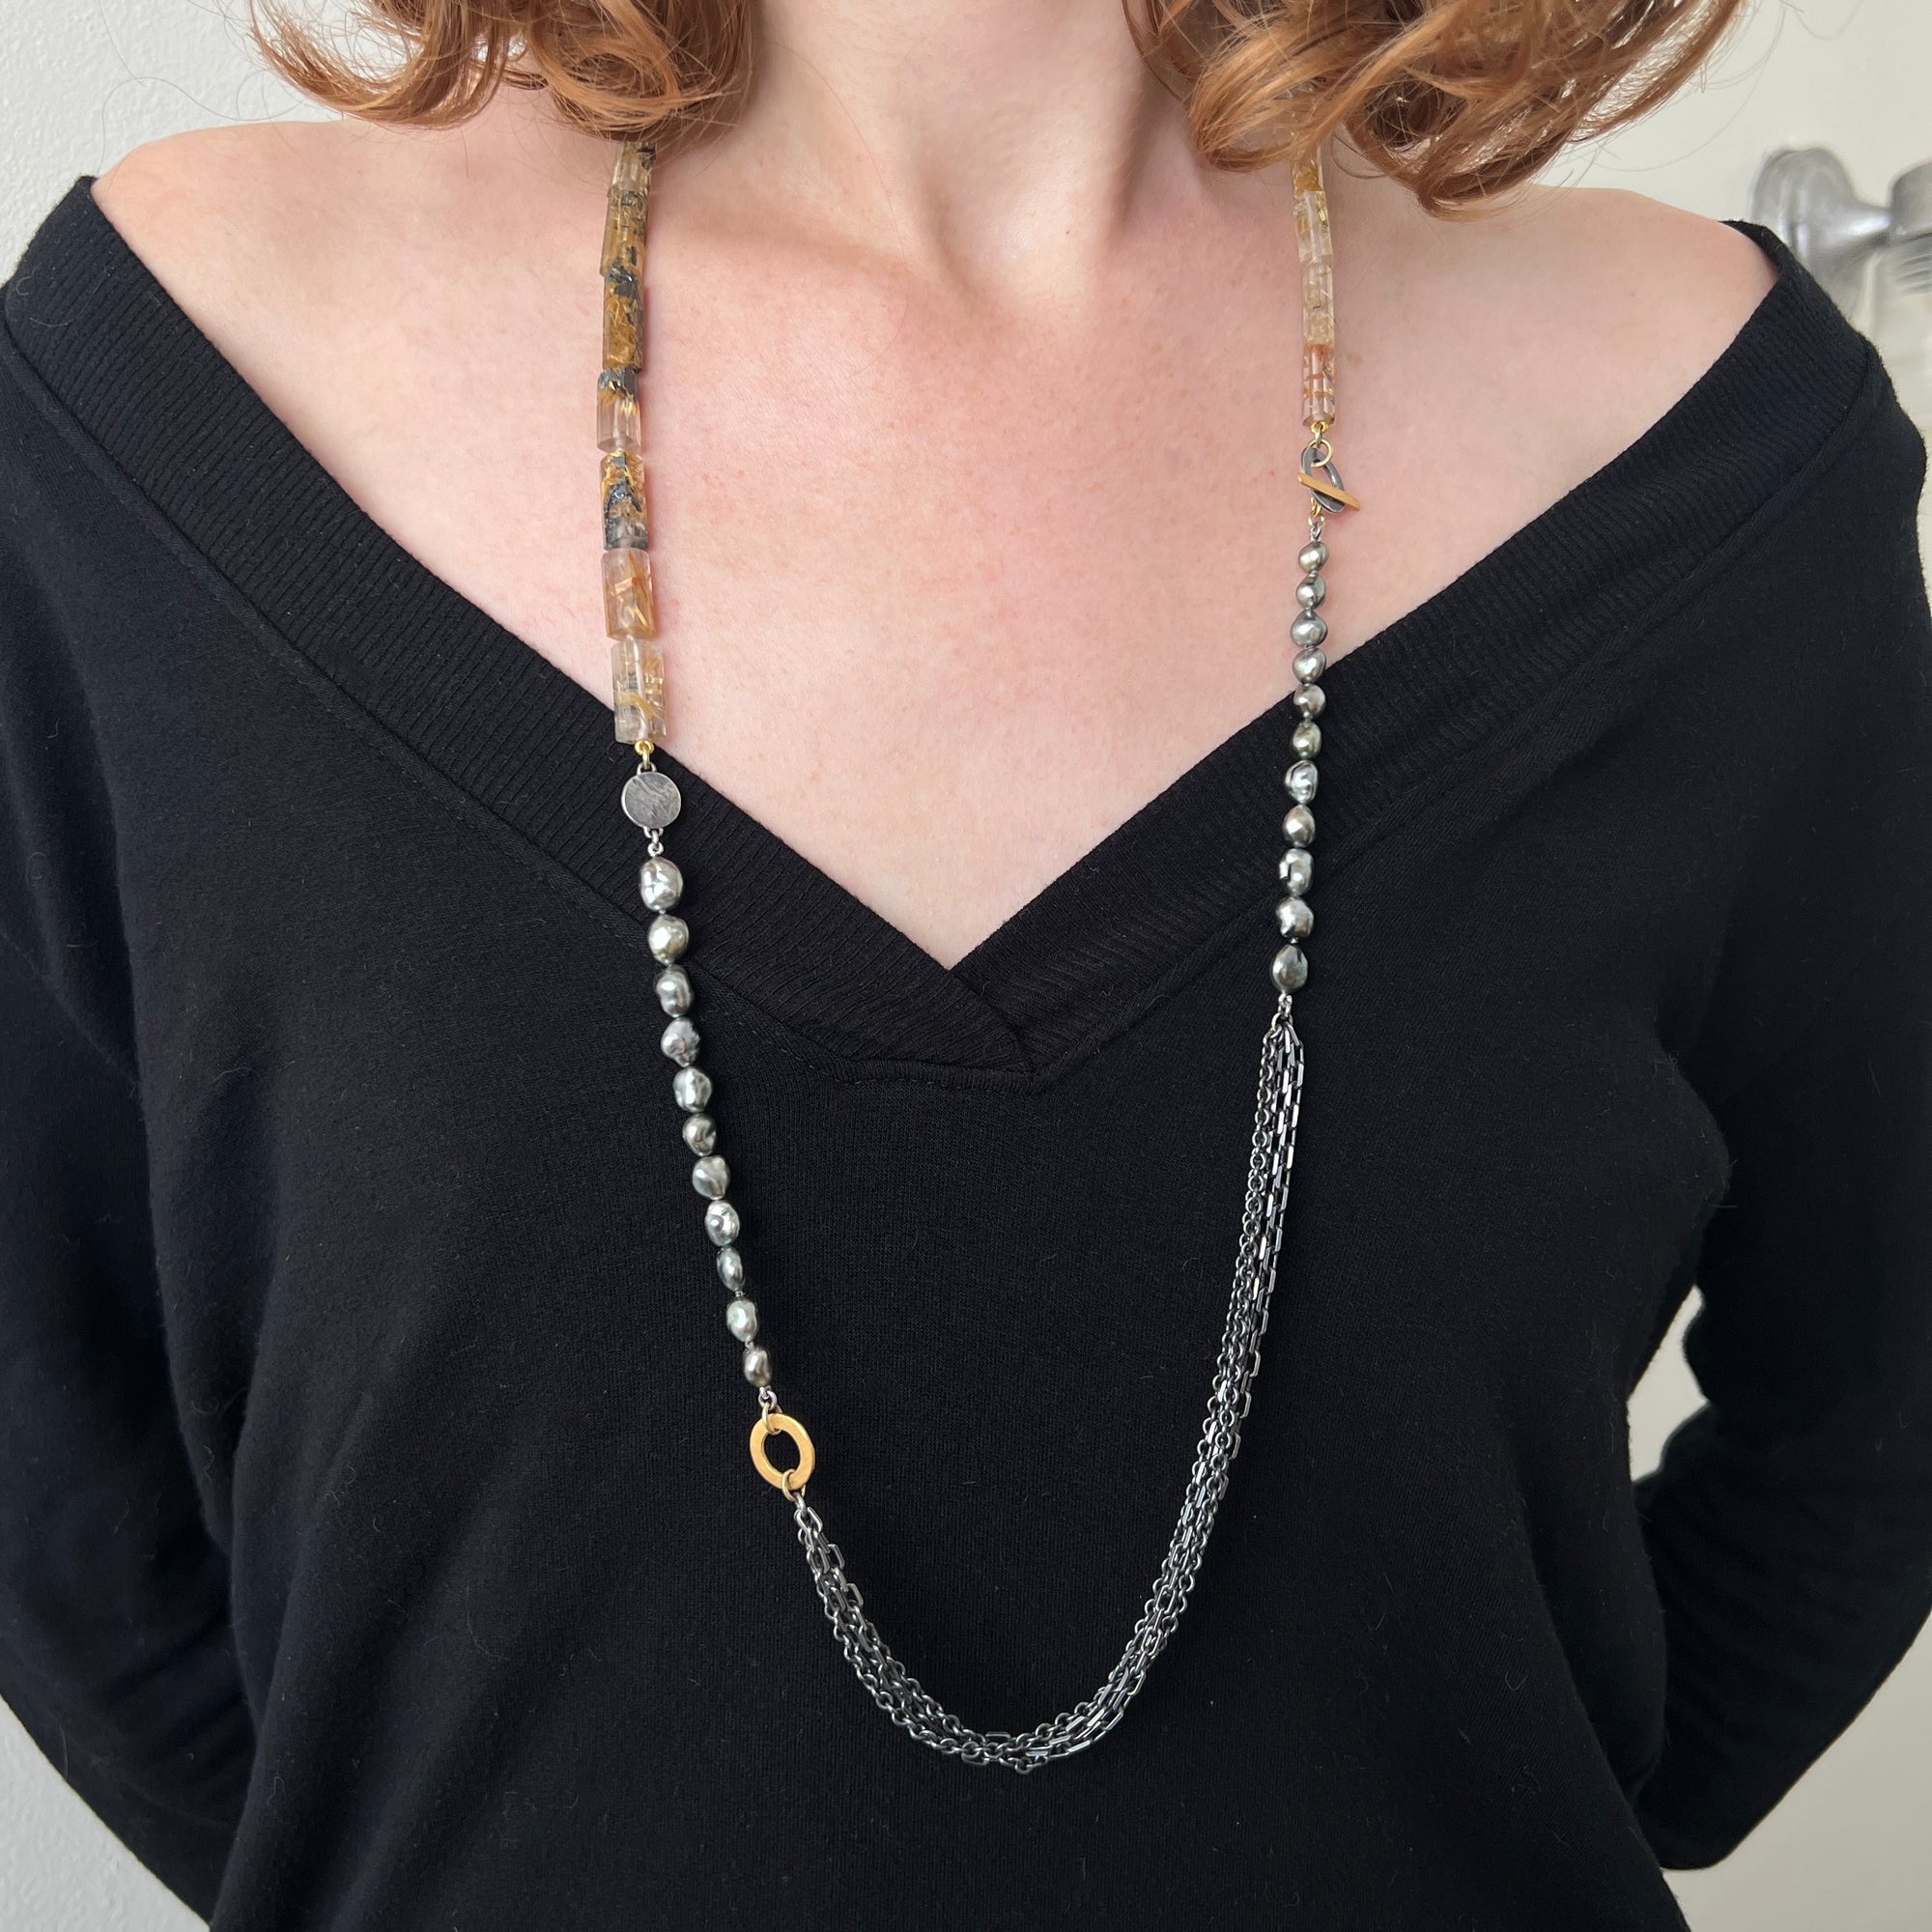 An eclectic necklace of rutilated quartz, South Sea pearls, oxidized sterling silver and vermeil